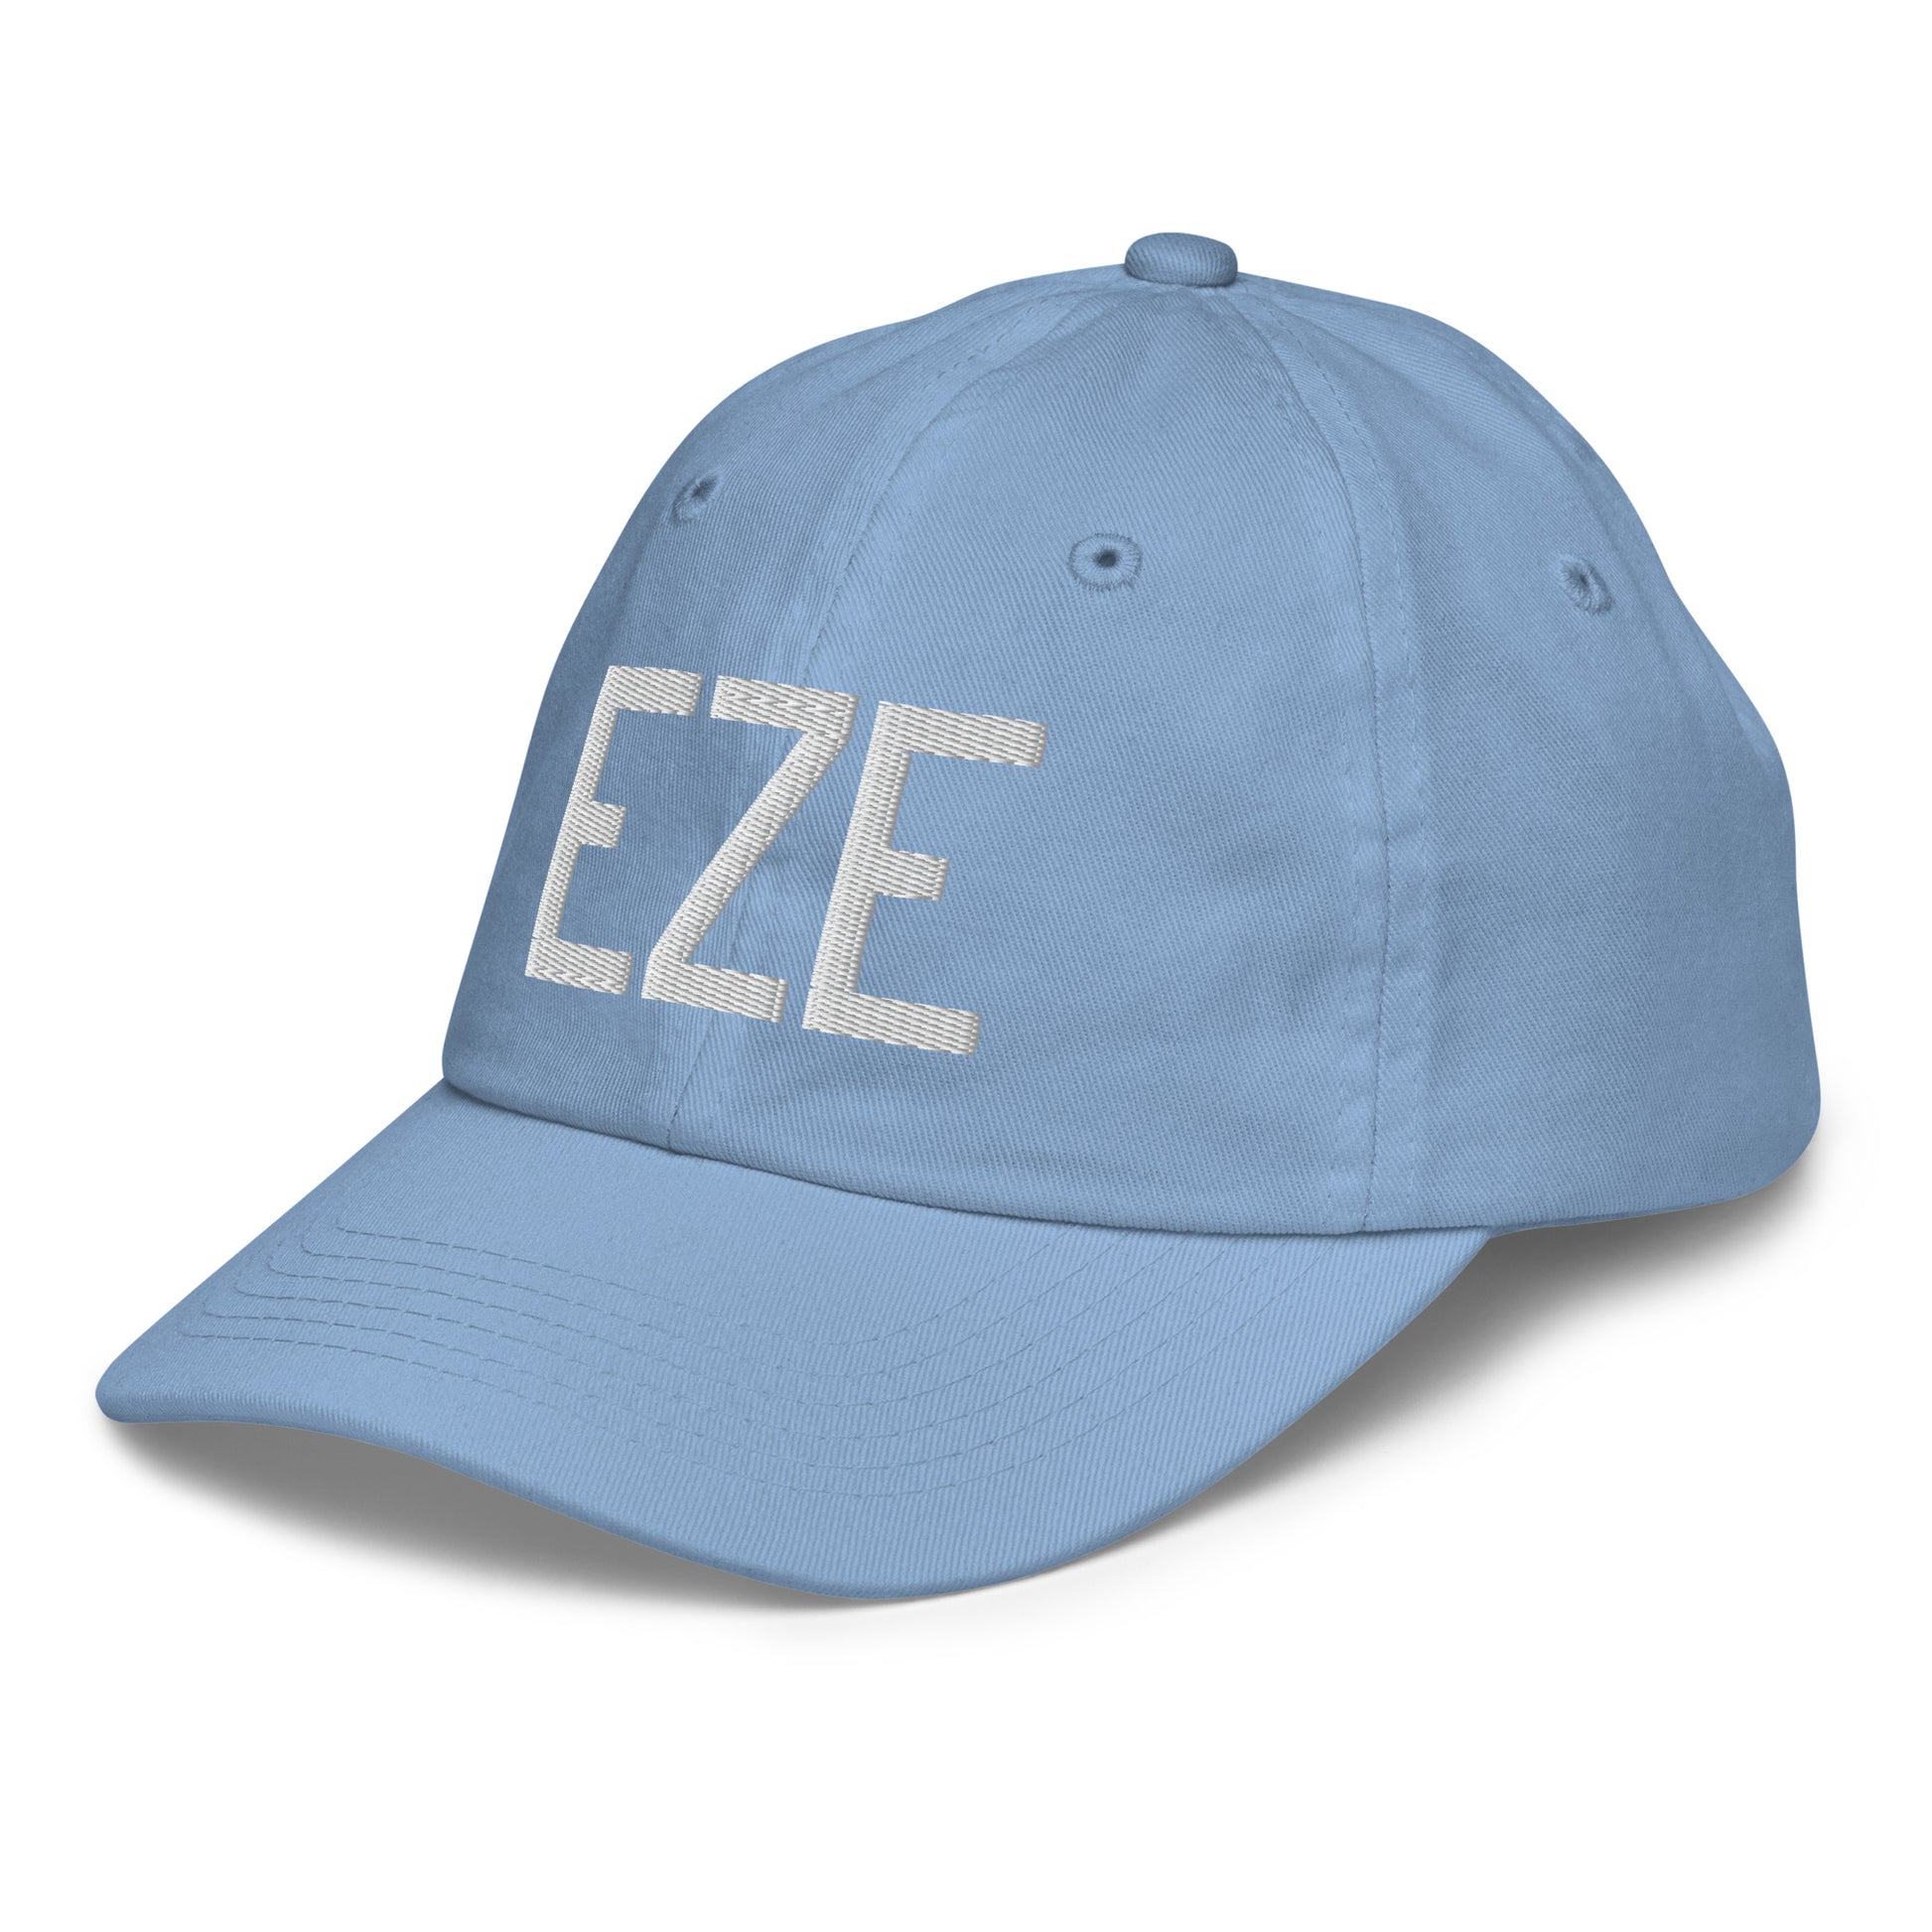 Airport Code Kid's Baseball Cap - White • EZE Buenos Aires • YHM Designs - Image 24